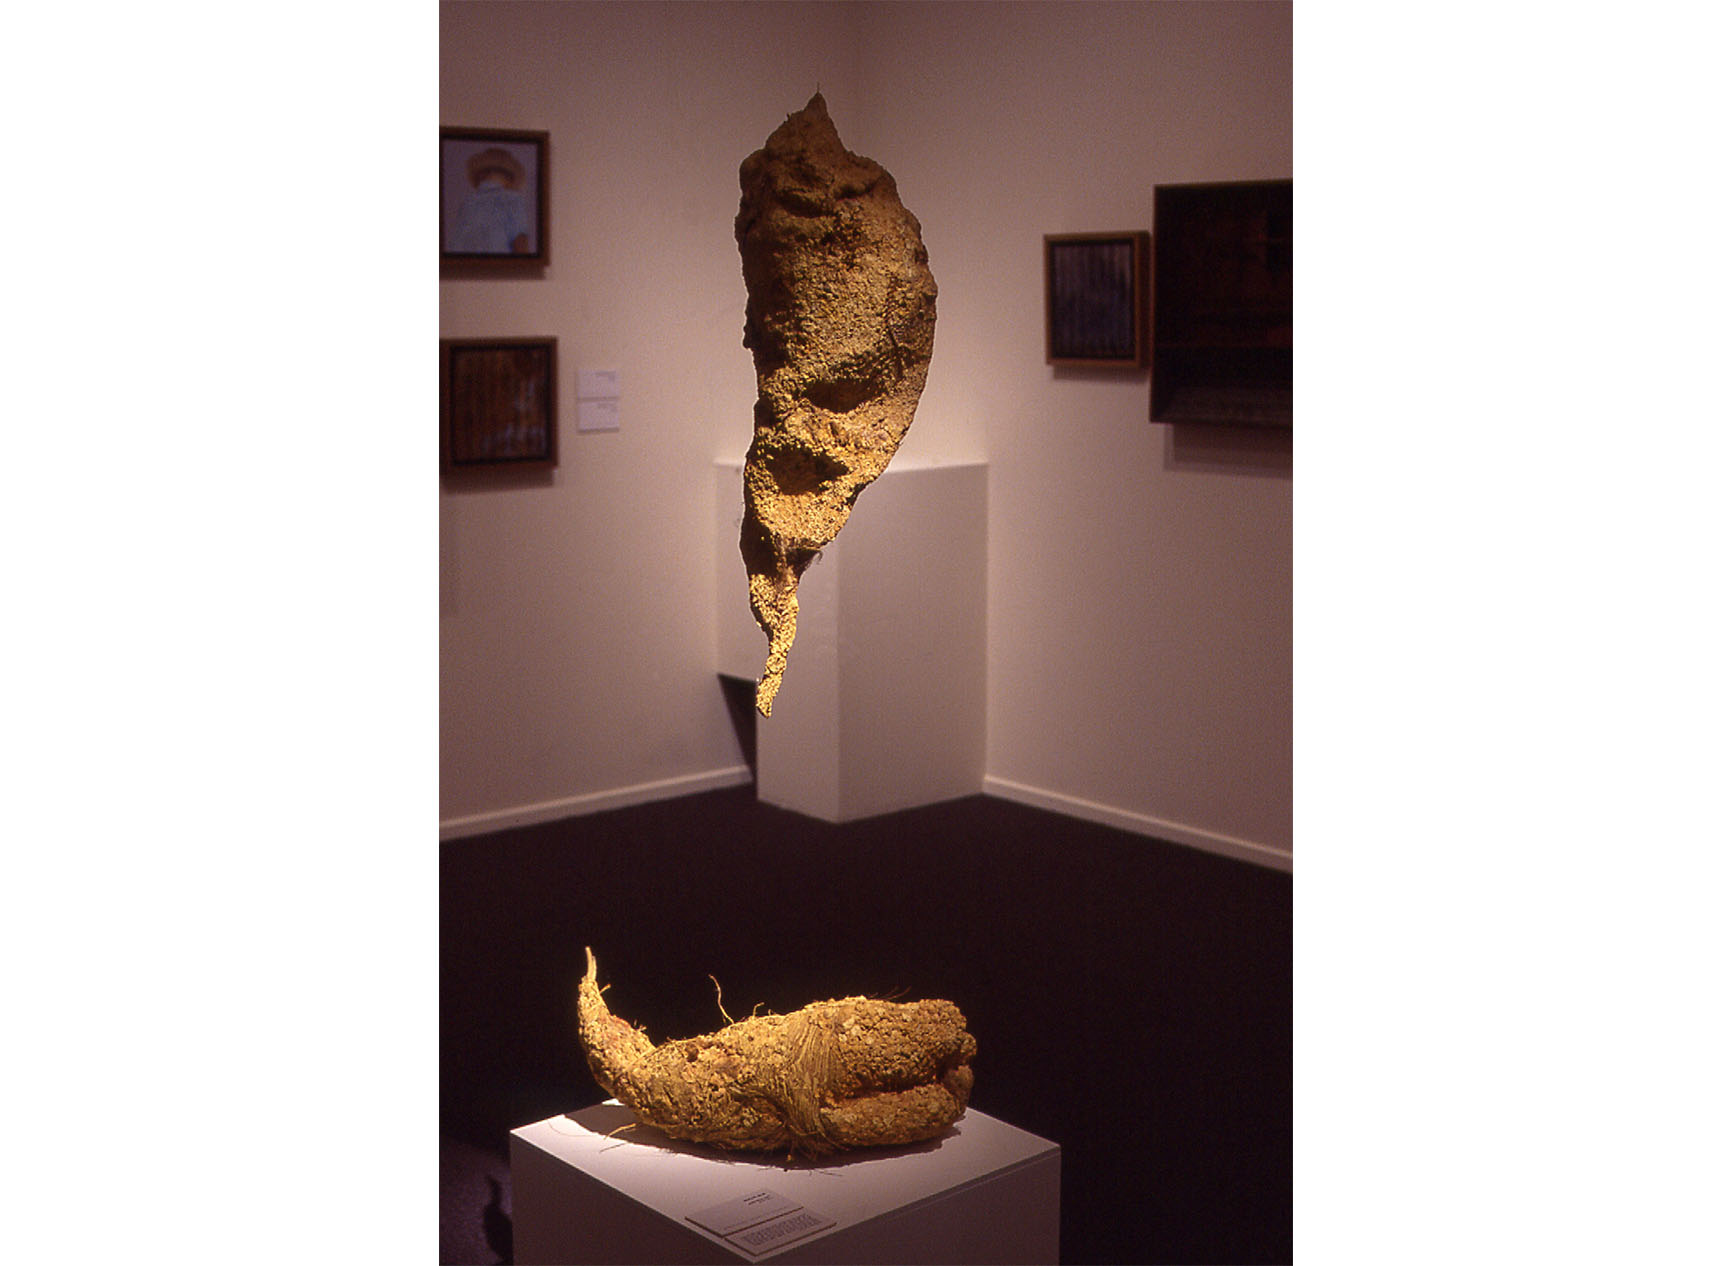 Two sculptures - one suspended, one lying - representing desert and past lives.  Paper mache intermingled with dead insects and small animal bones